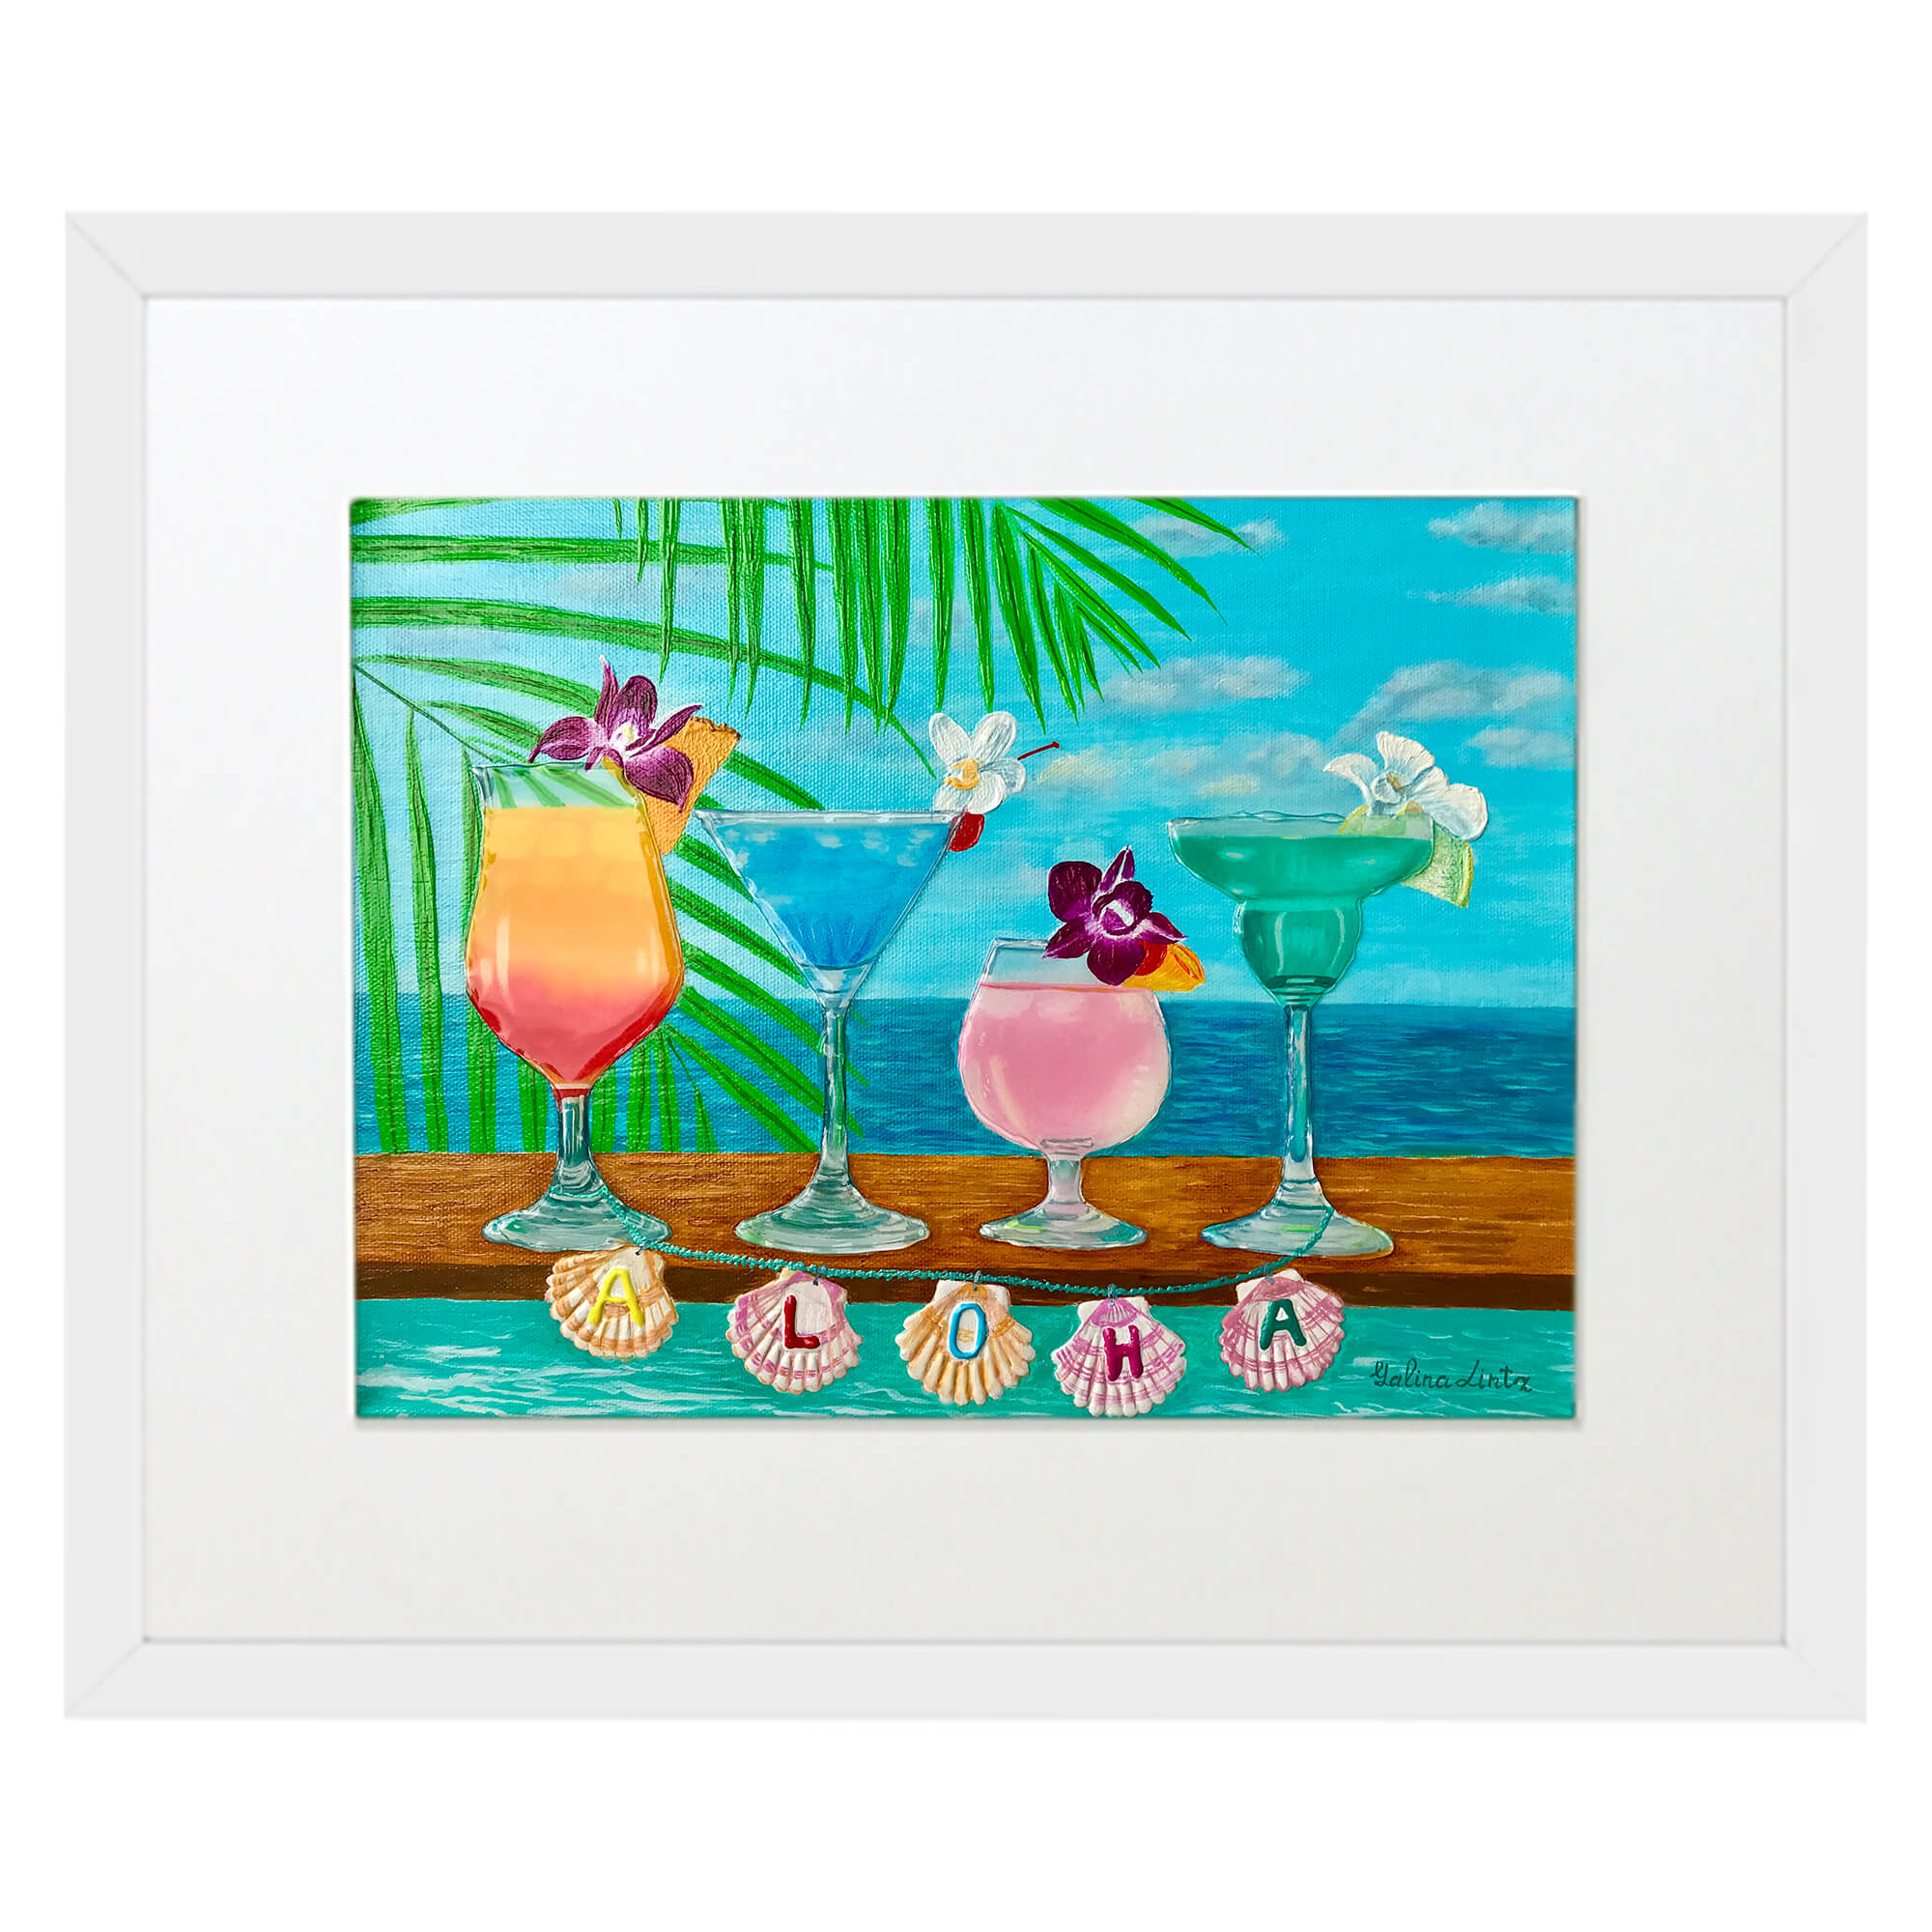 Matted art print with white frame featuring a palm tree leaf by hawaii artist Galina Lintz